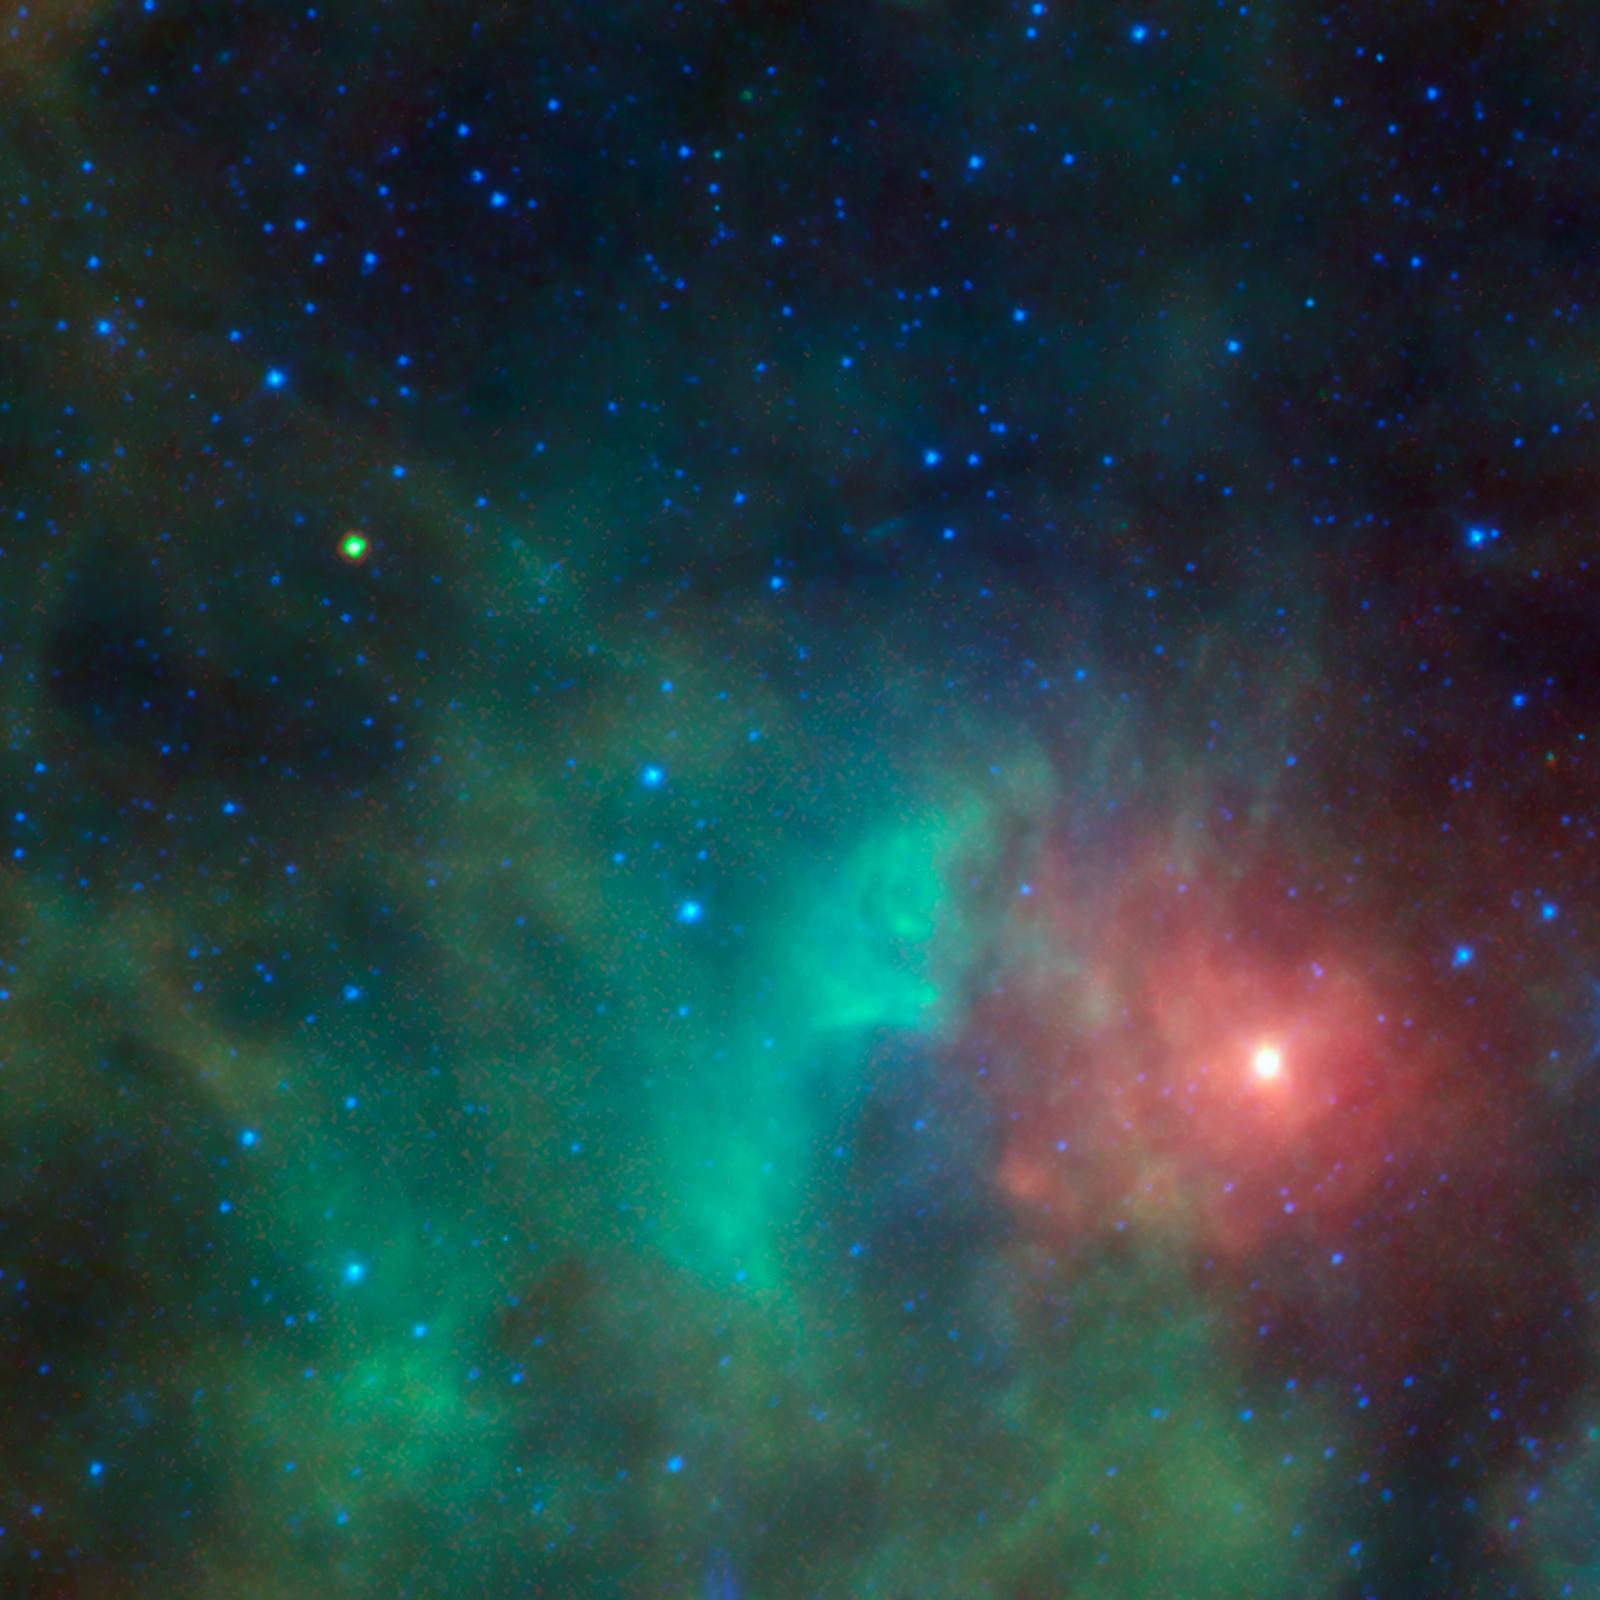 This image shows the potentially hazardous near-Earth object 1998 KN3 as it zips past a cloud of dense gas and dust near the Orion nebula.